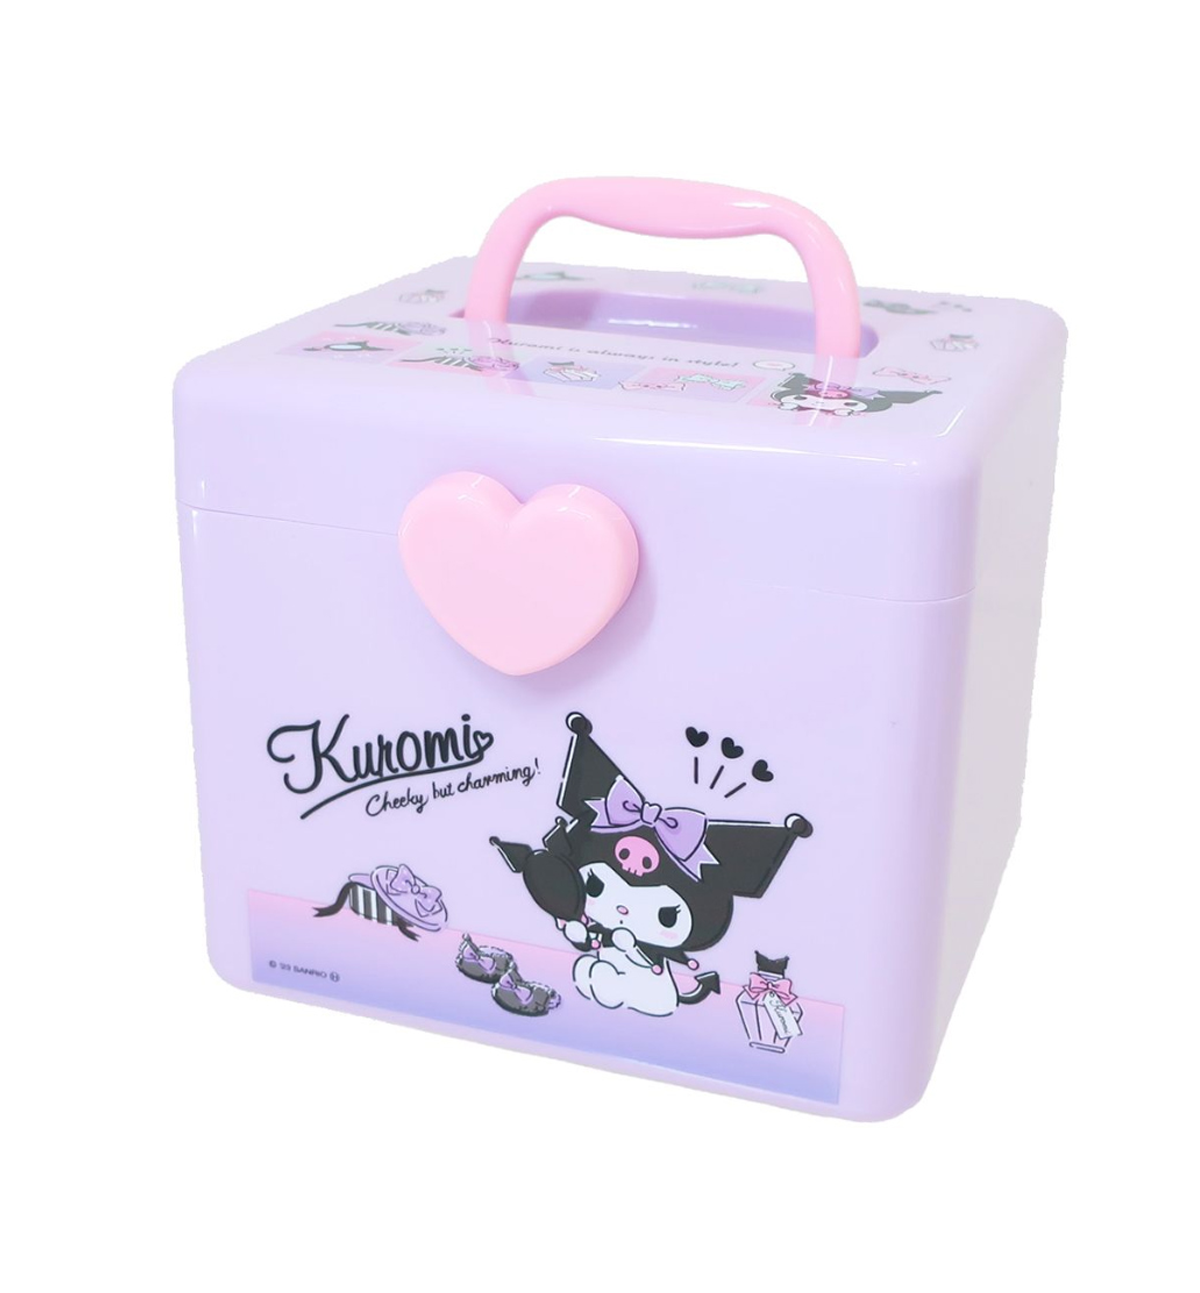 Sanrio Relief Lunch Box - My Melody